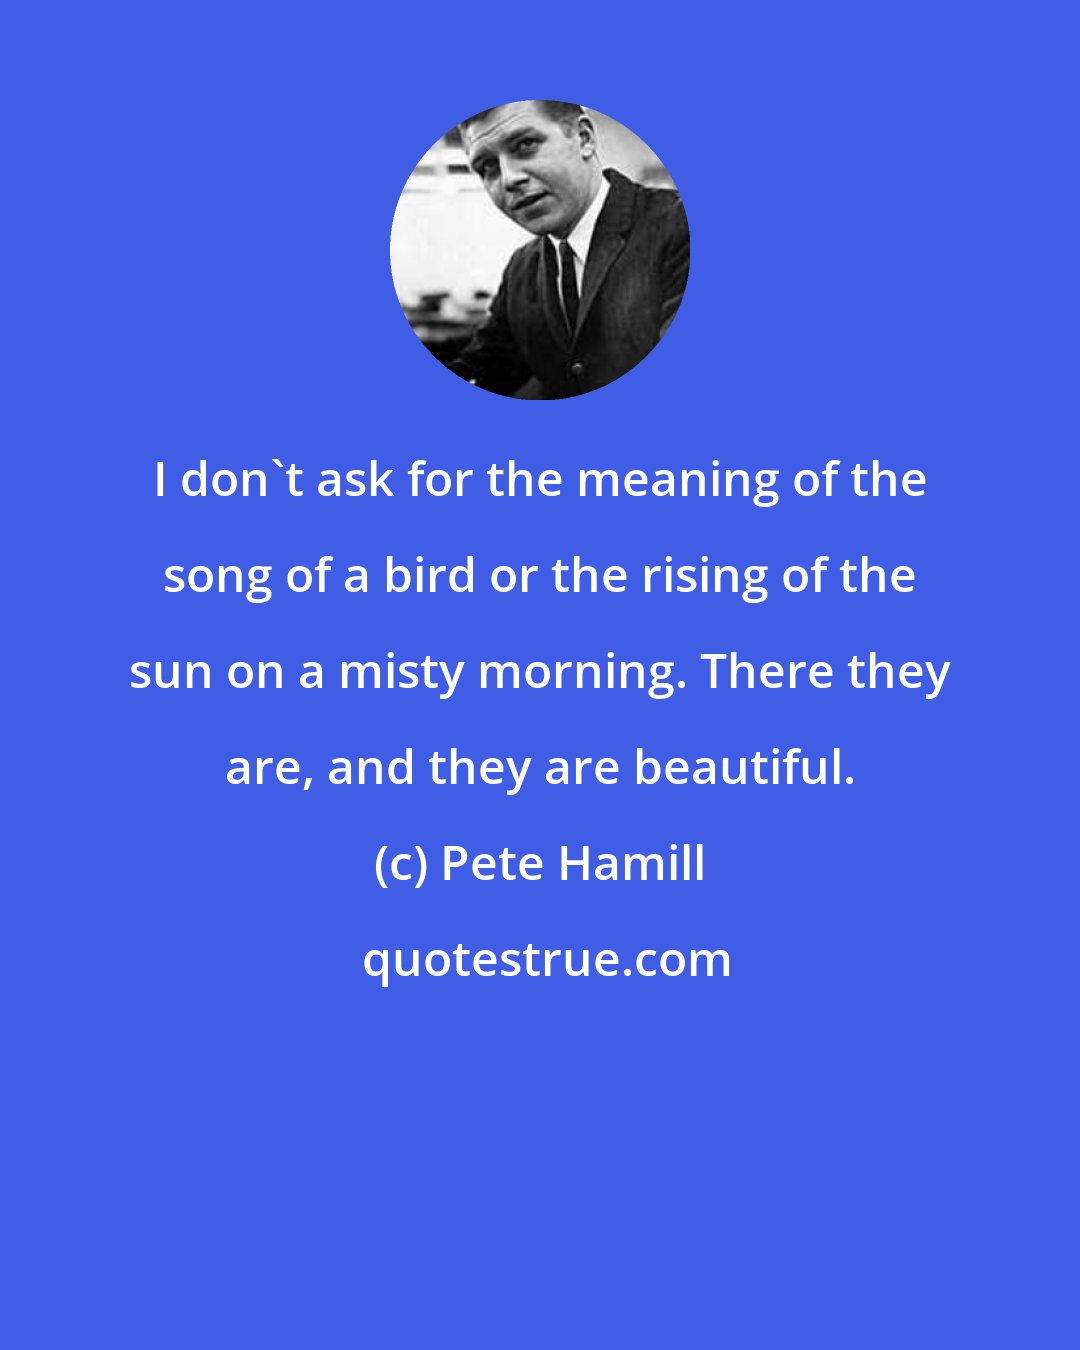 Pete Hamill: I don't ask for the meaning of the song of a bird or the rising of the sun on a misty morning. There they are, and they are beautiful.